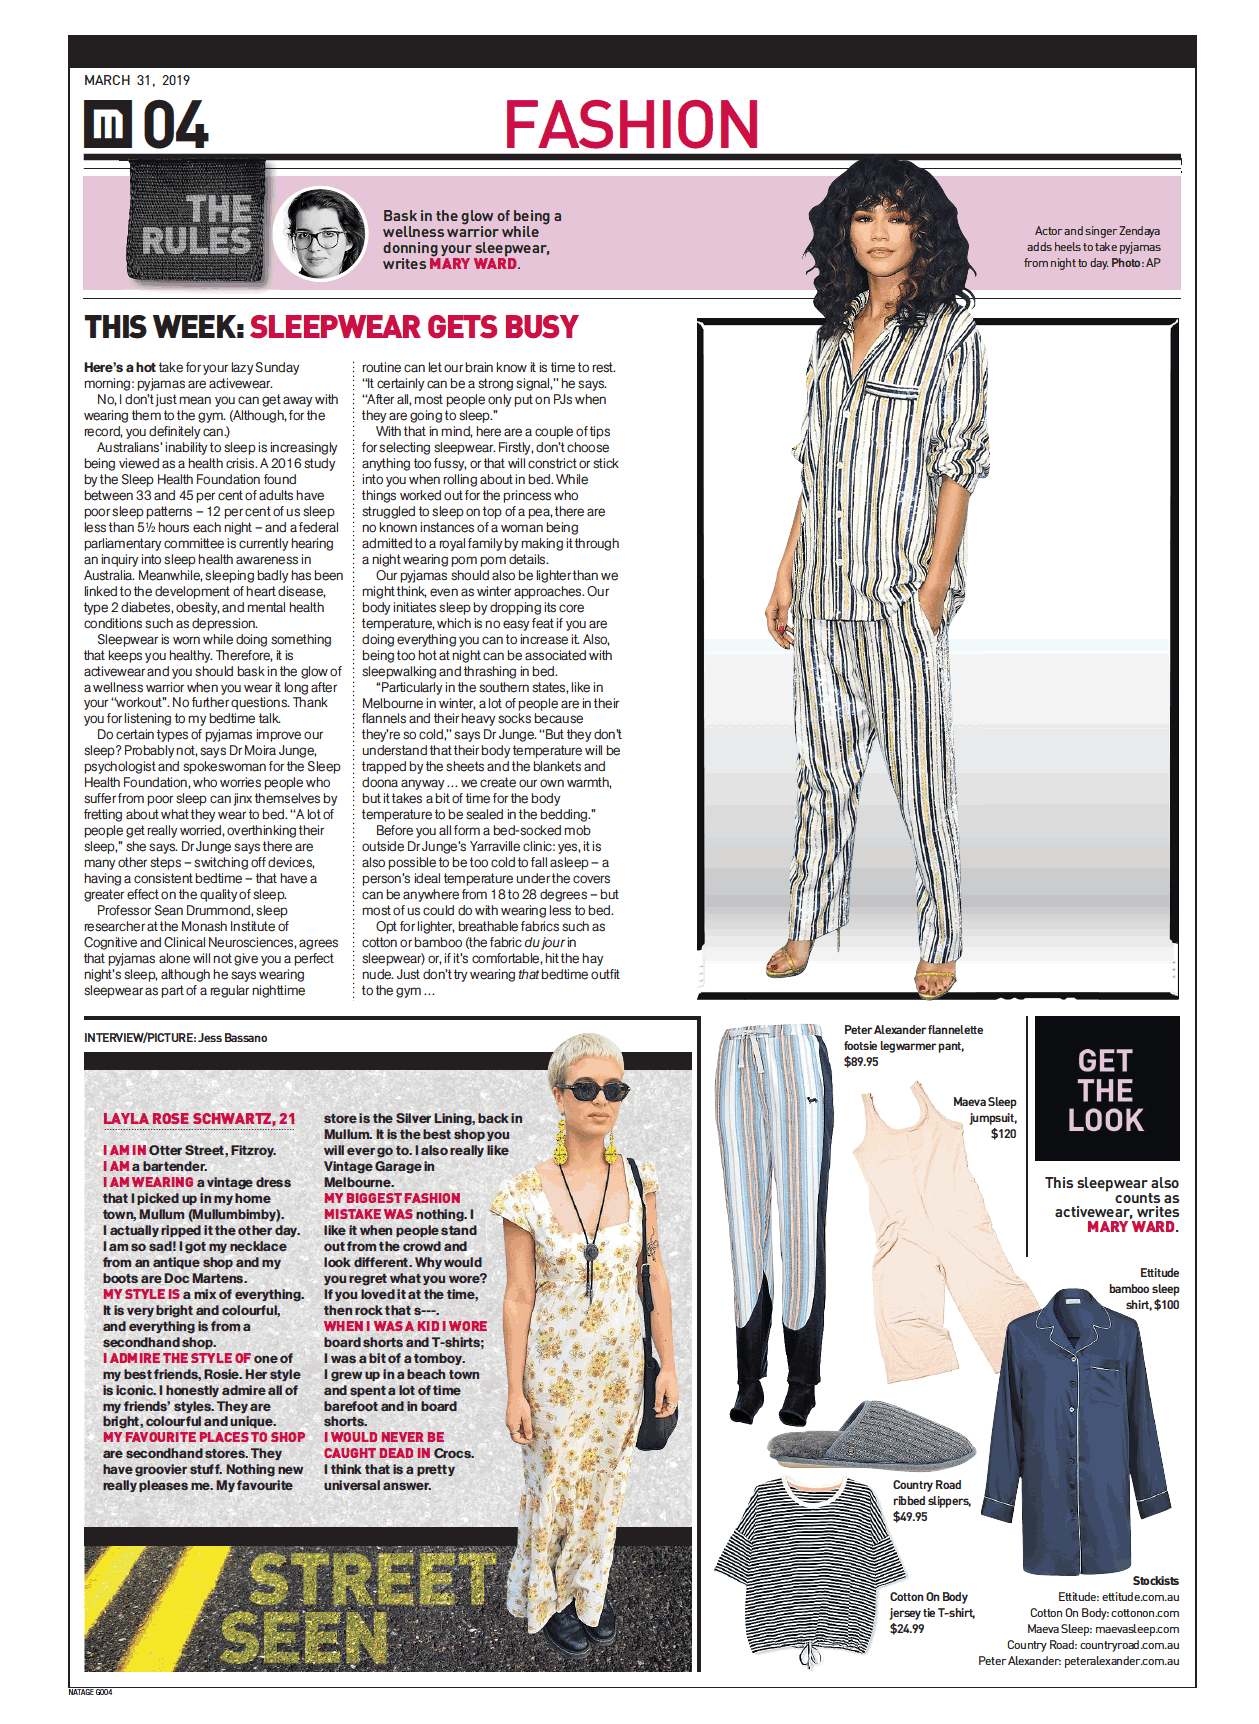 the Sunday age newspaper, print editorial feature in fashion section. Editorial article about sleepwear and pyjamas being the new activewear - featuring the nala jumpsuit by MAEVA Sleep. Luxury French Terry, comfortable, breathable and soft.